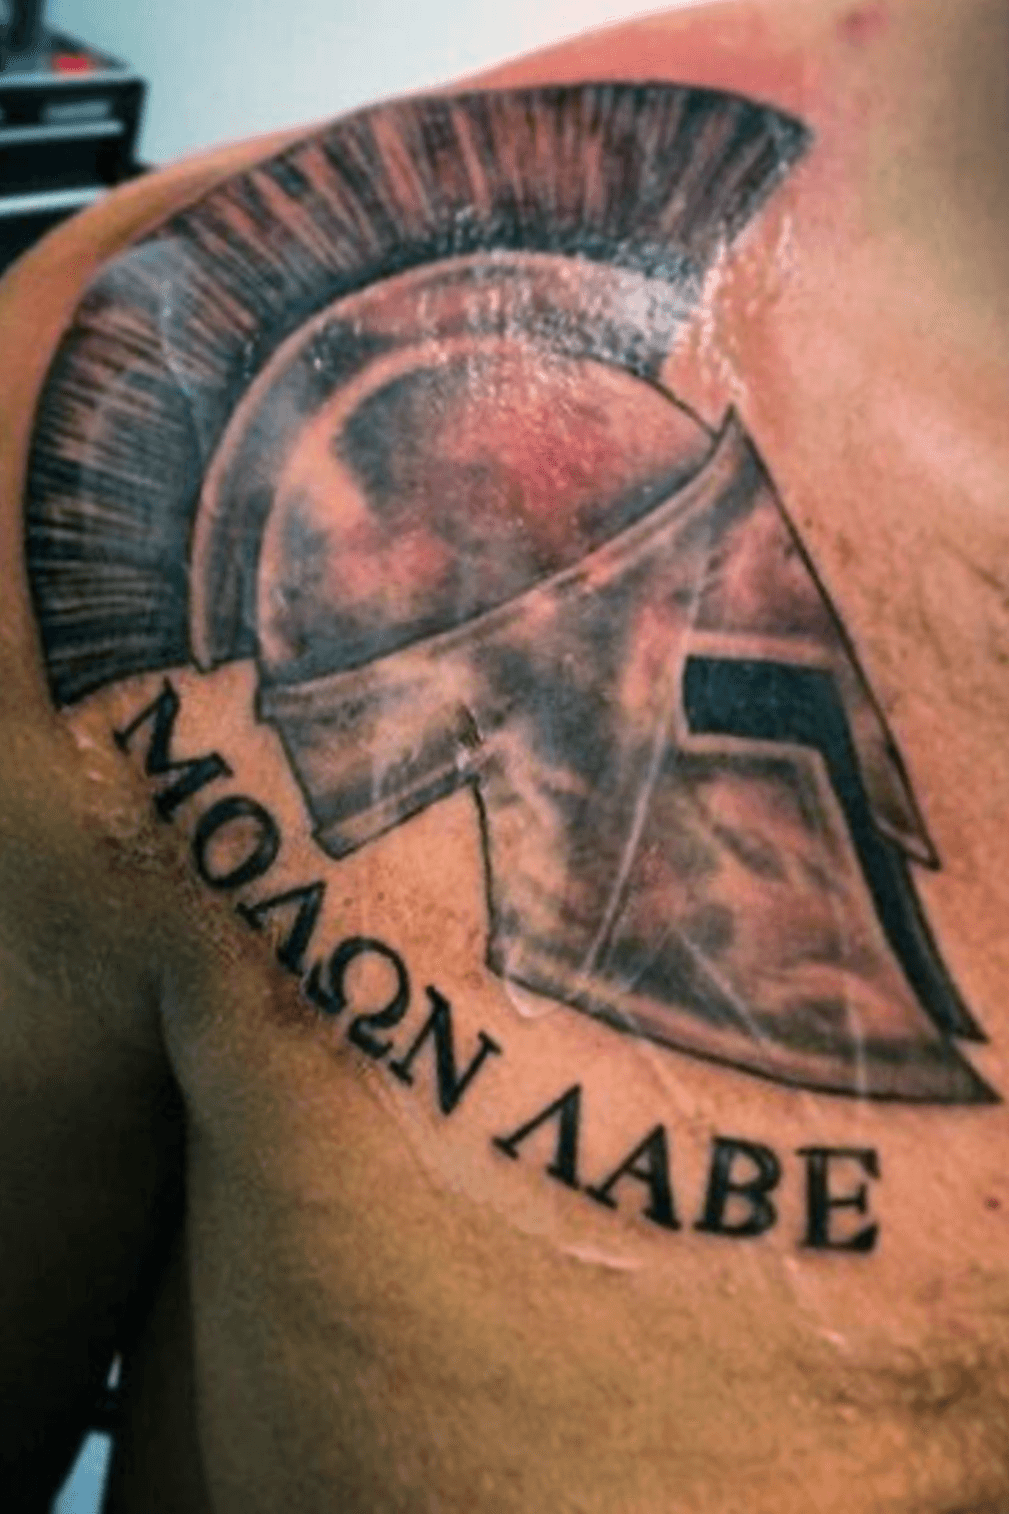 Top 23 Molon Labe Tattoo Designs and What They Mean